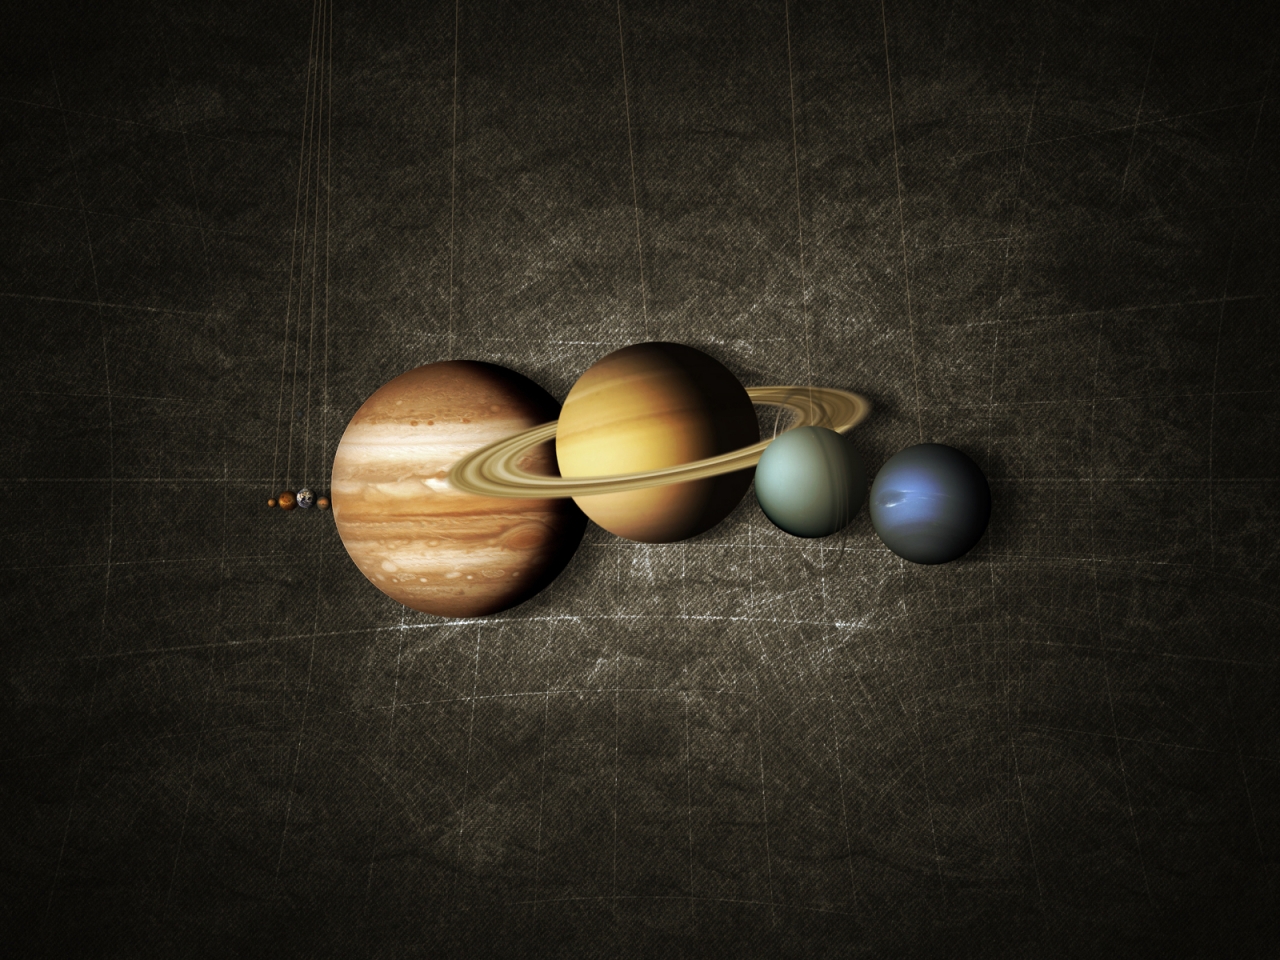 Planets Aligned for 1280 x 960 resolution